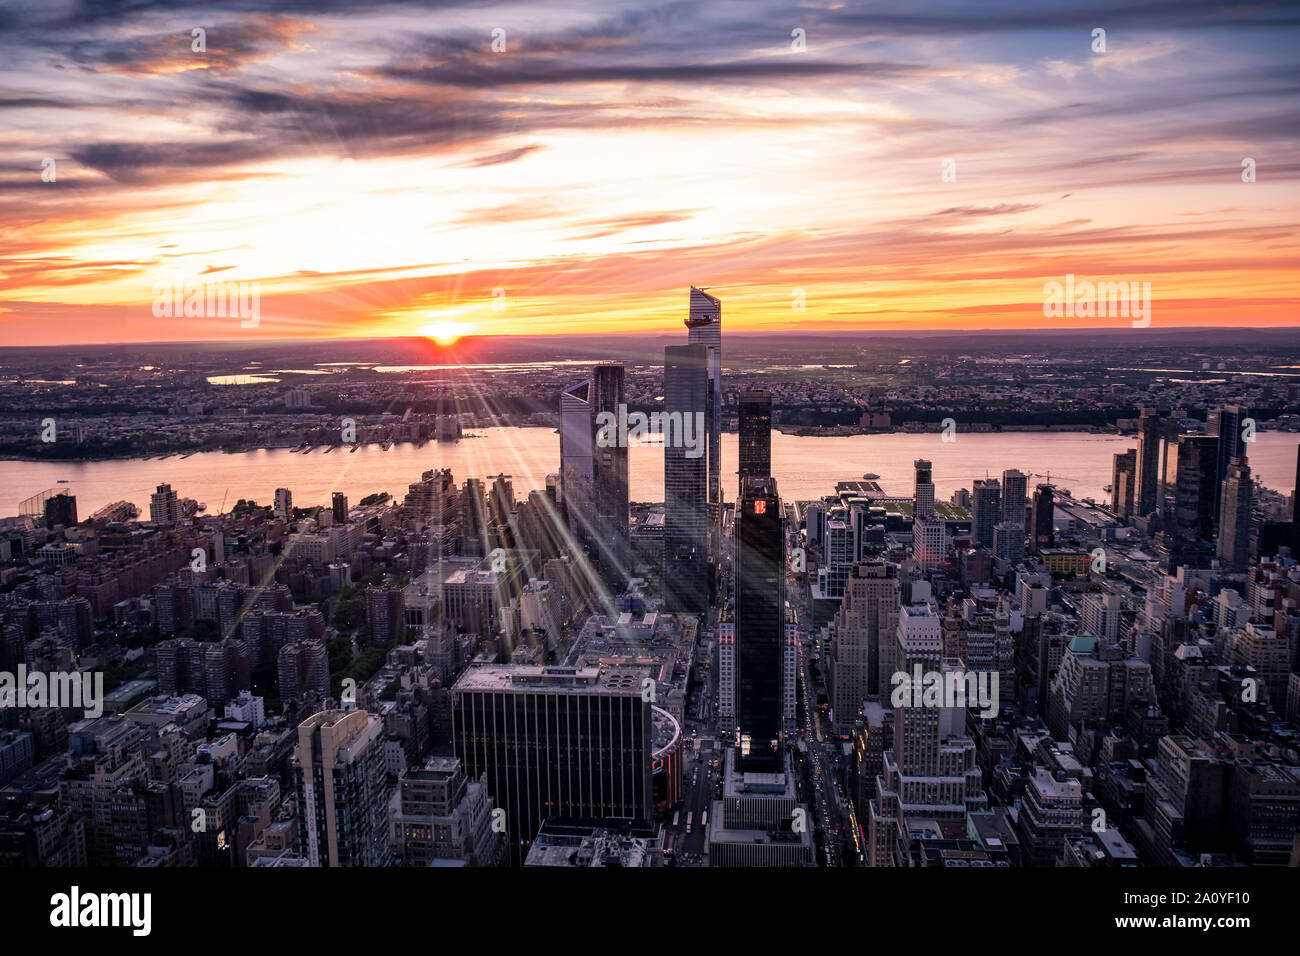 View across New York City at midtown Manhattan and the Hudson river at sunset from the Empire State Building Stock Photo